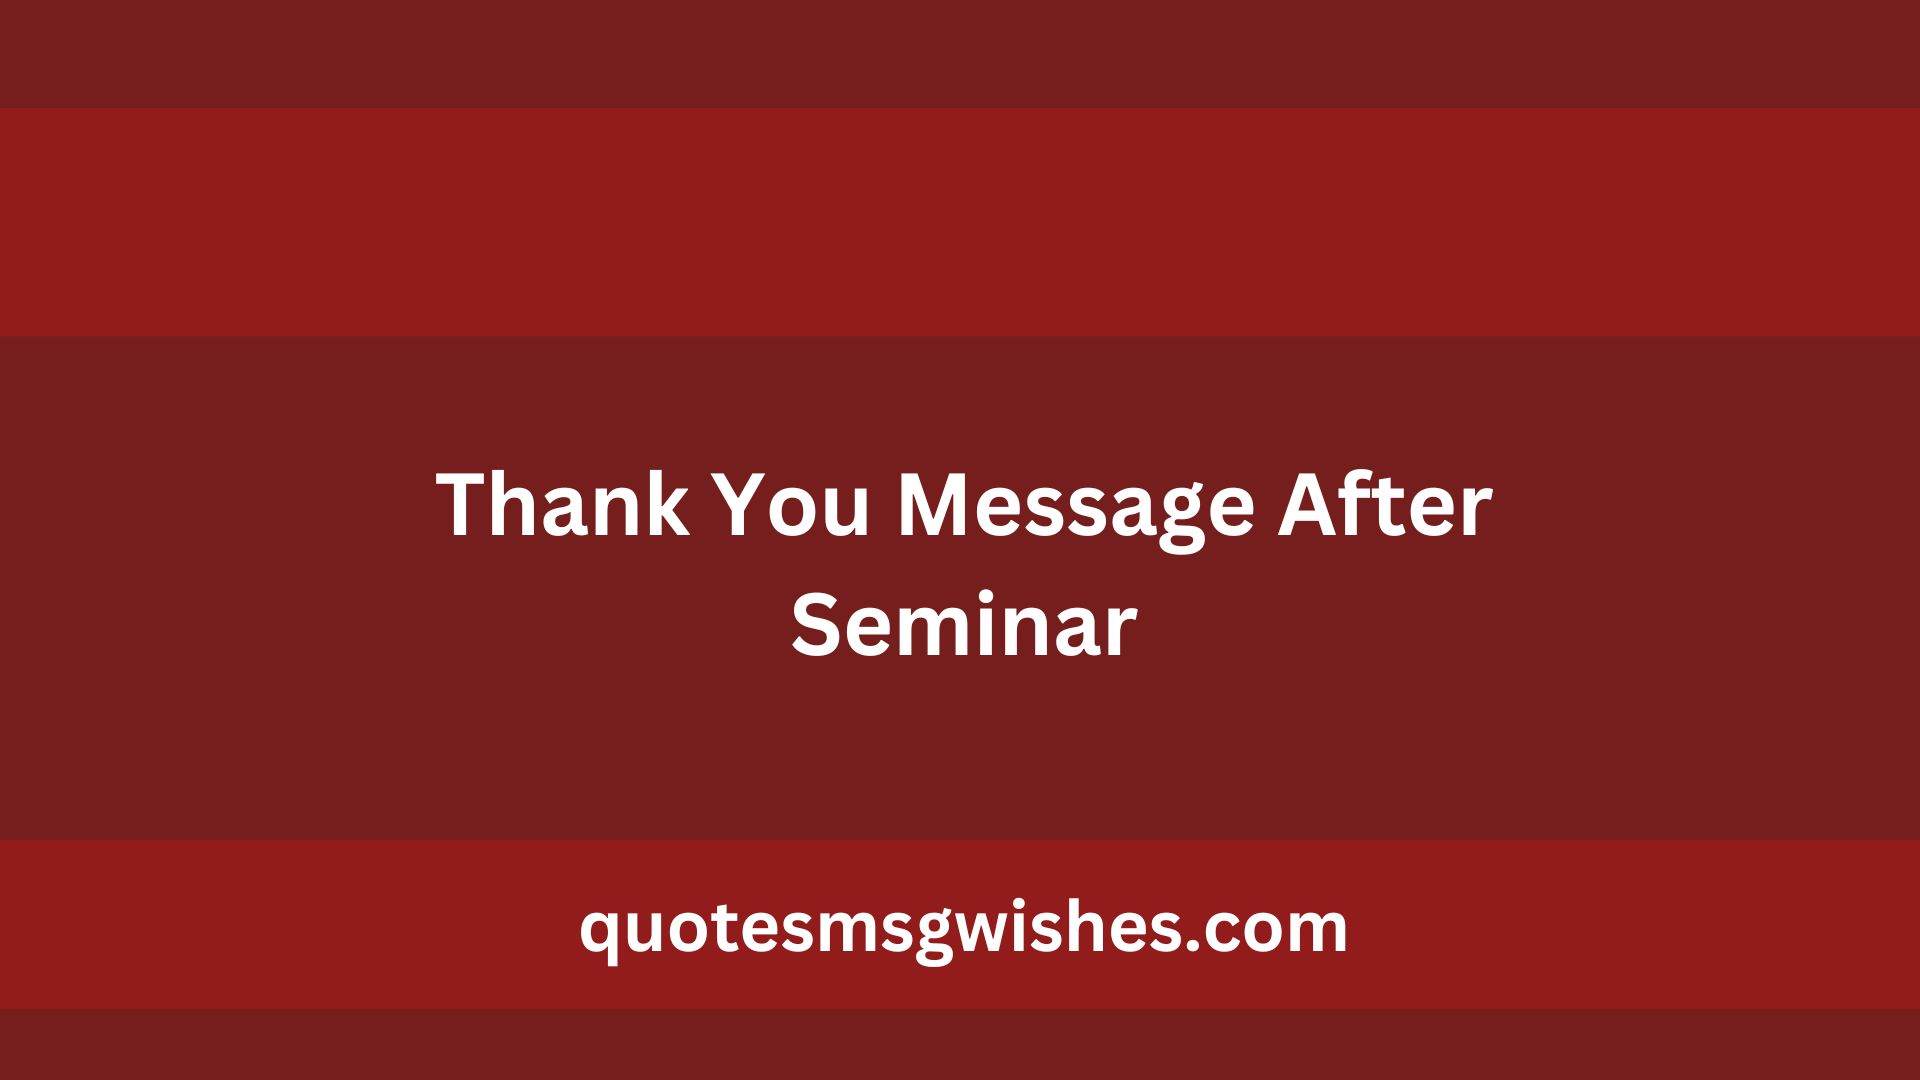 Thank You Message After Seminar